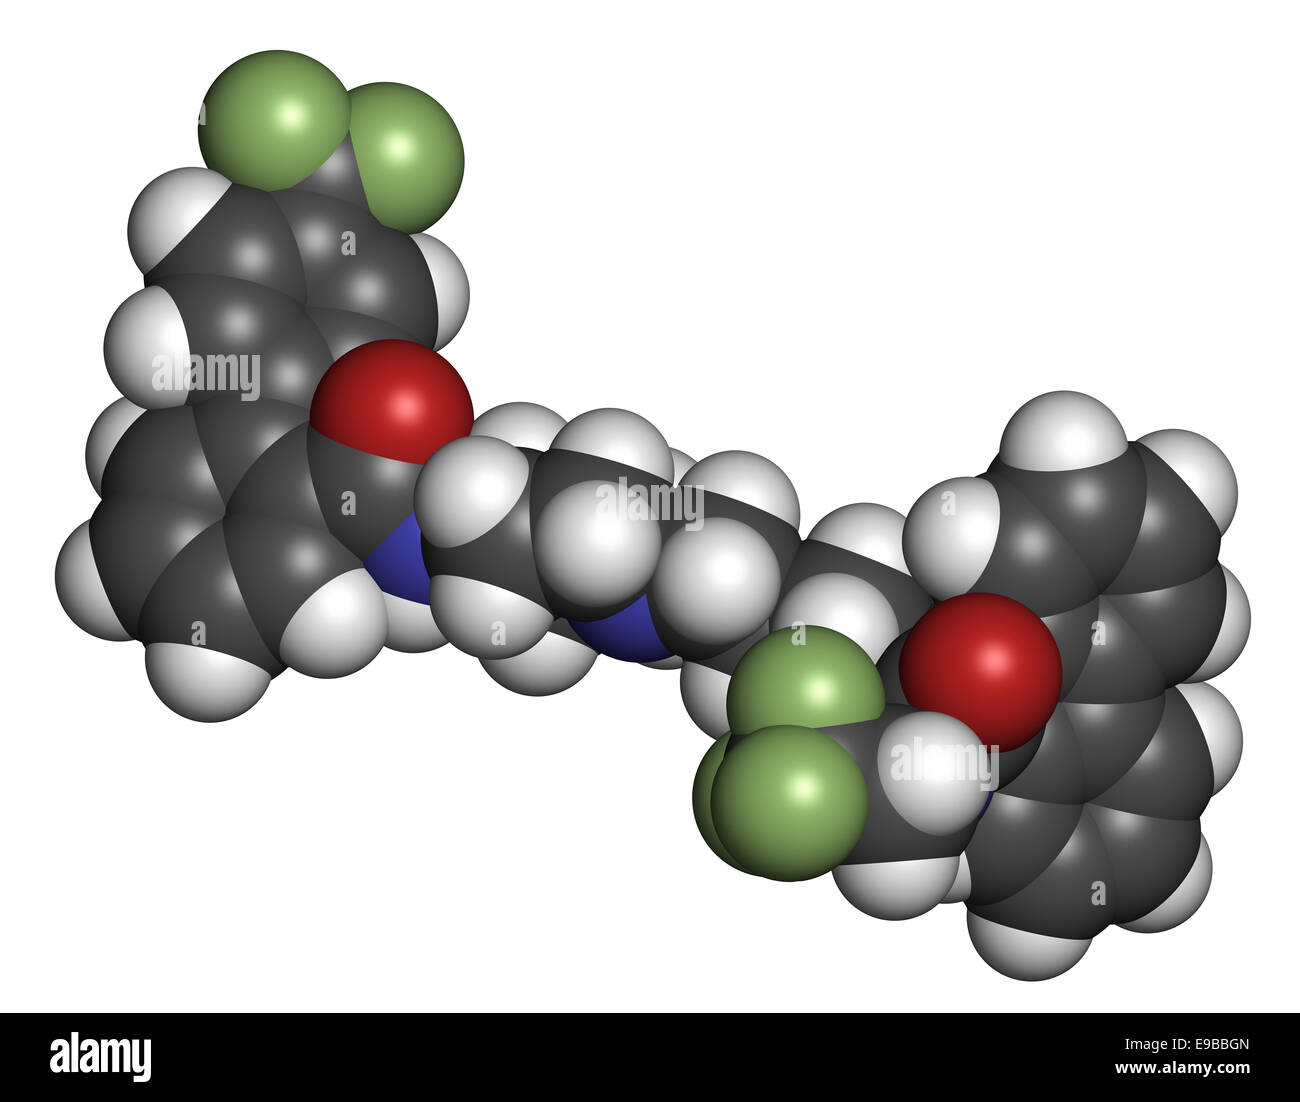 Lomitapide cholesterol lowering drug molecule. Used in treatment of homozygous familial hypercholesterolemia. Atoms are represen Stock Photo